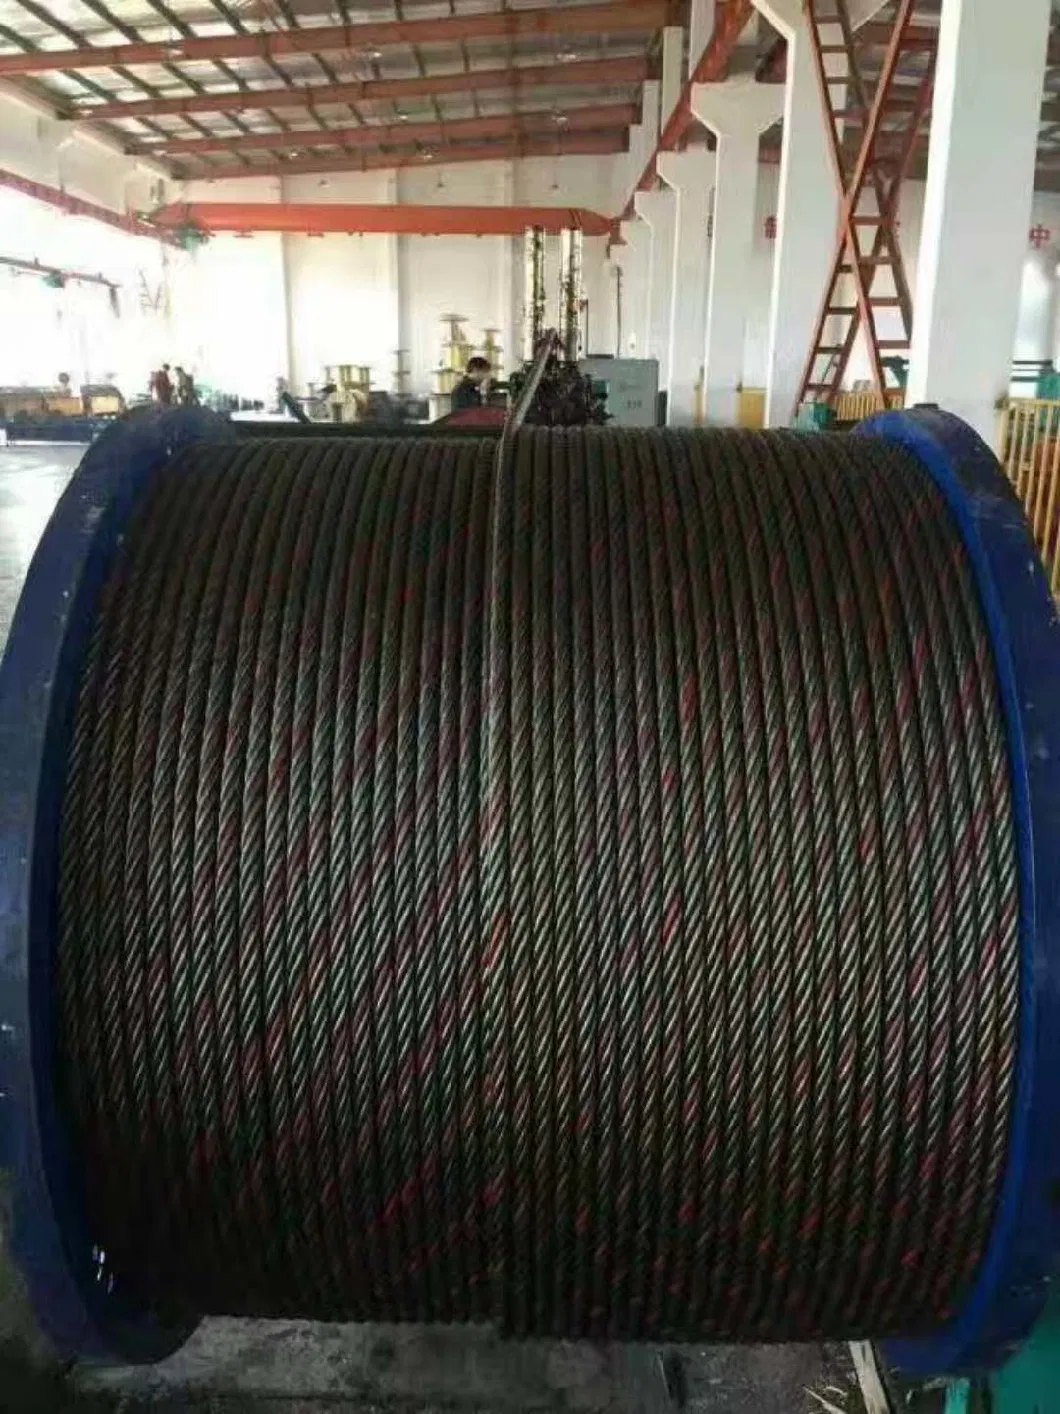 6X7+FC Galvanized Wire Rope, Steel Cable, Wire Rope Distributor